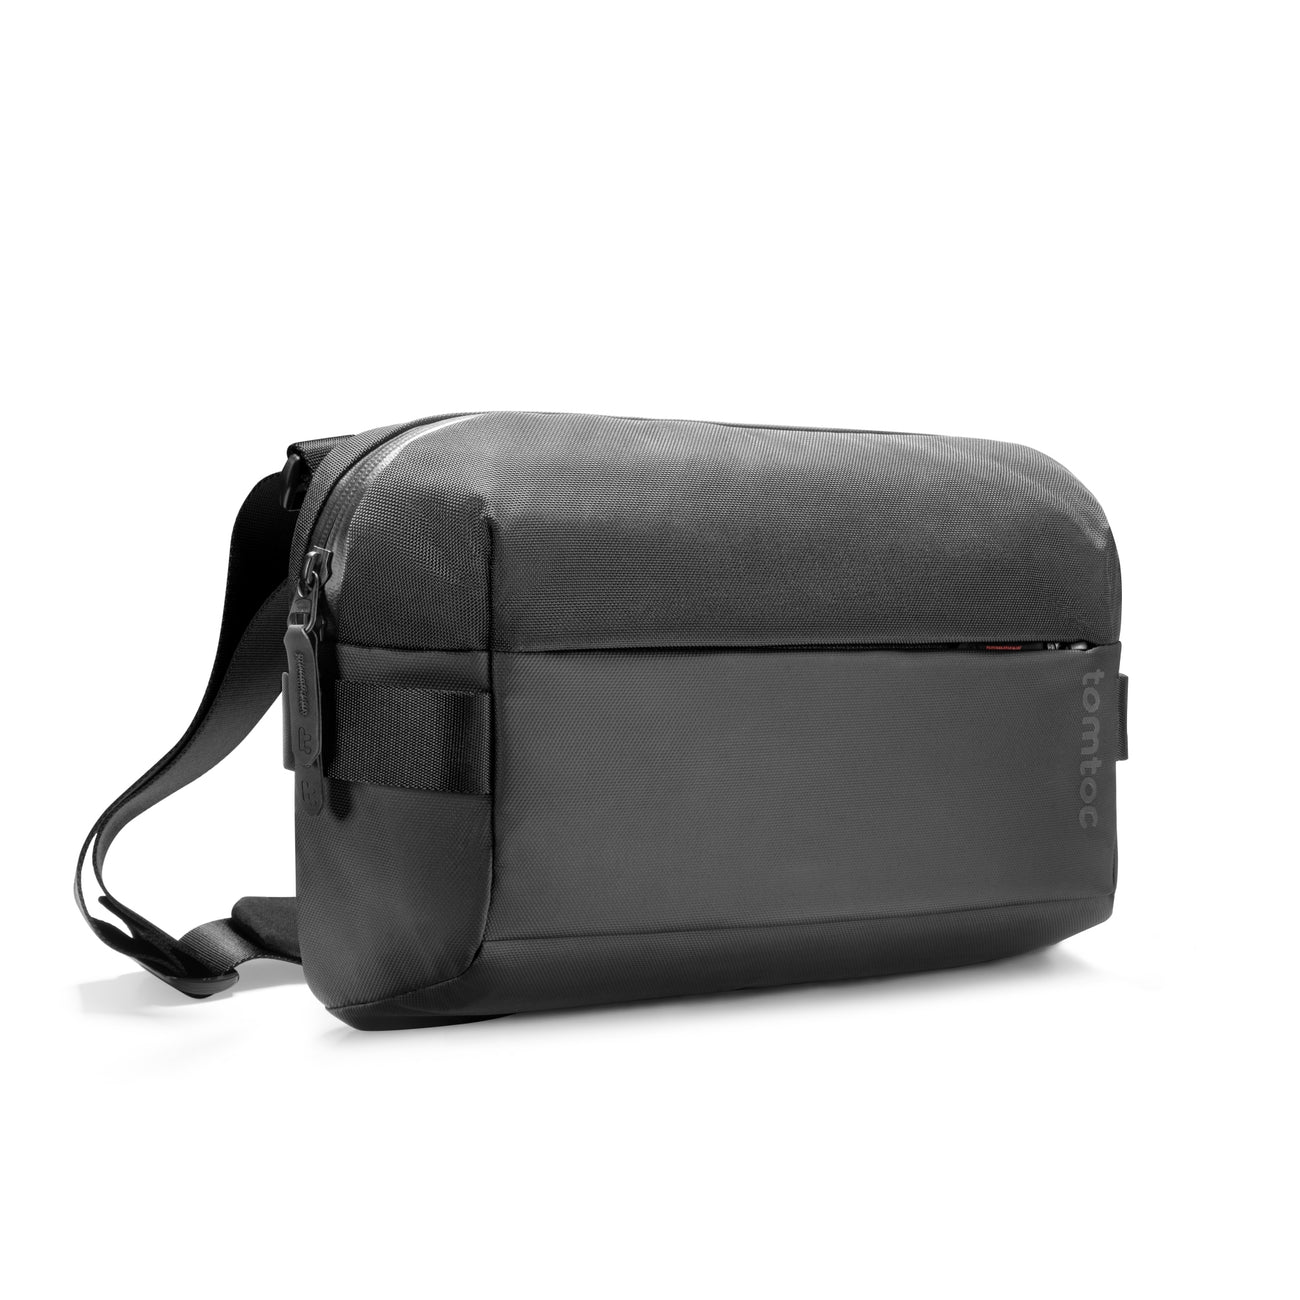 Túi đeo Tomtoc Urban Sling Travel and Work 11